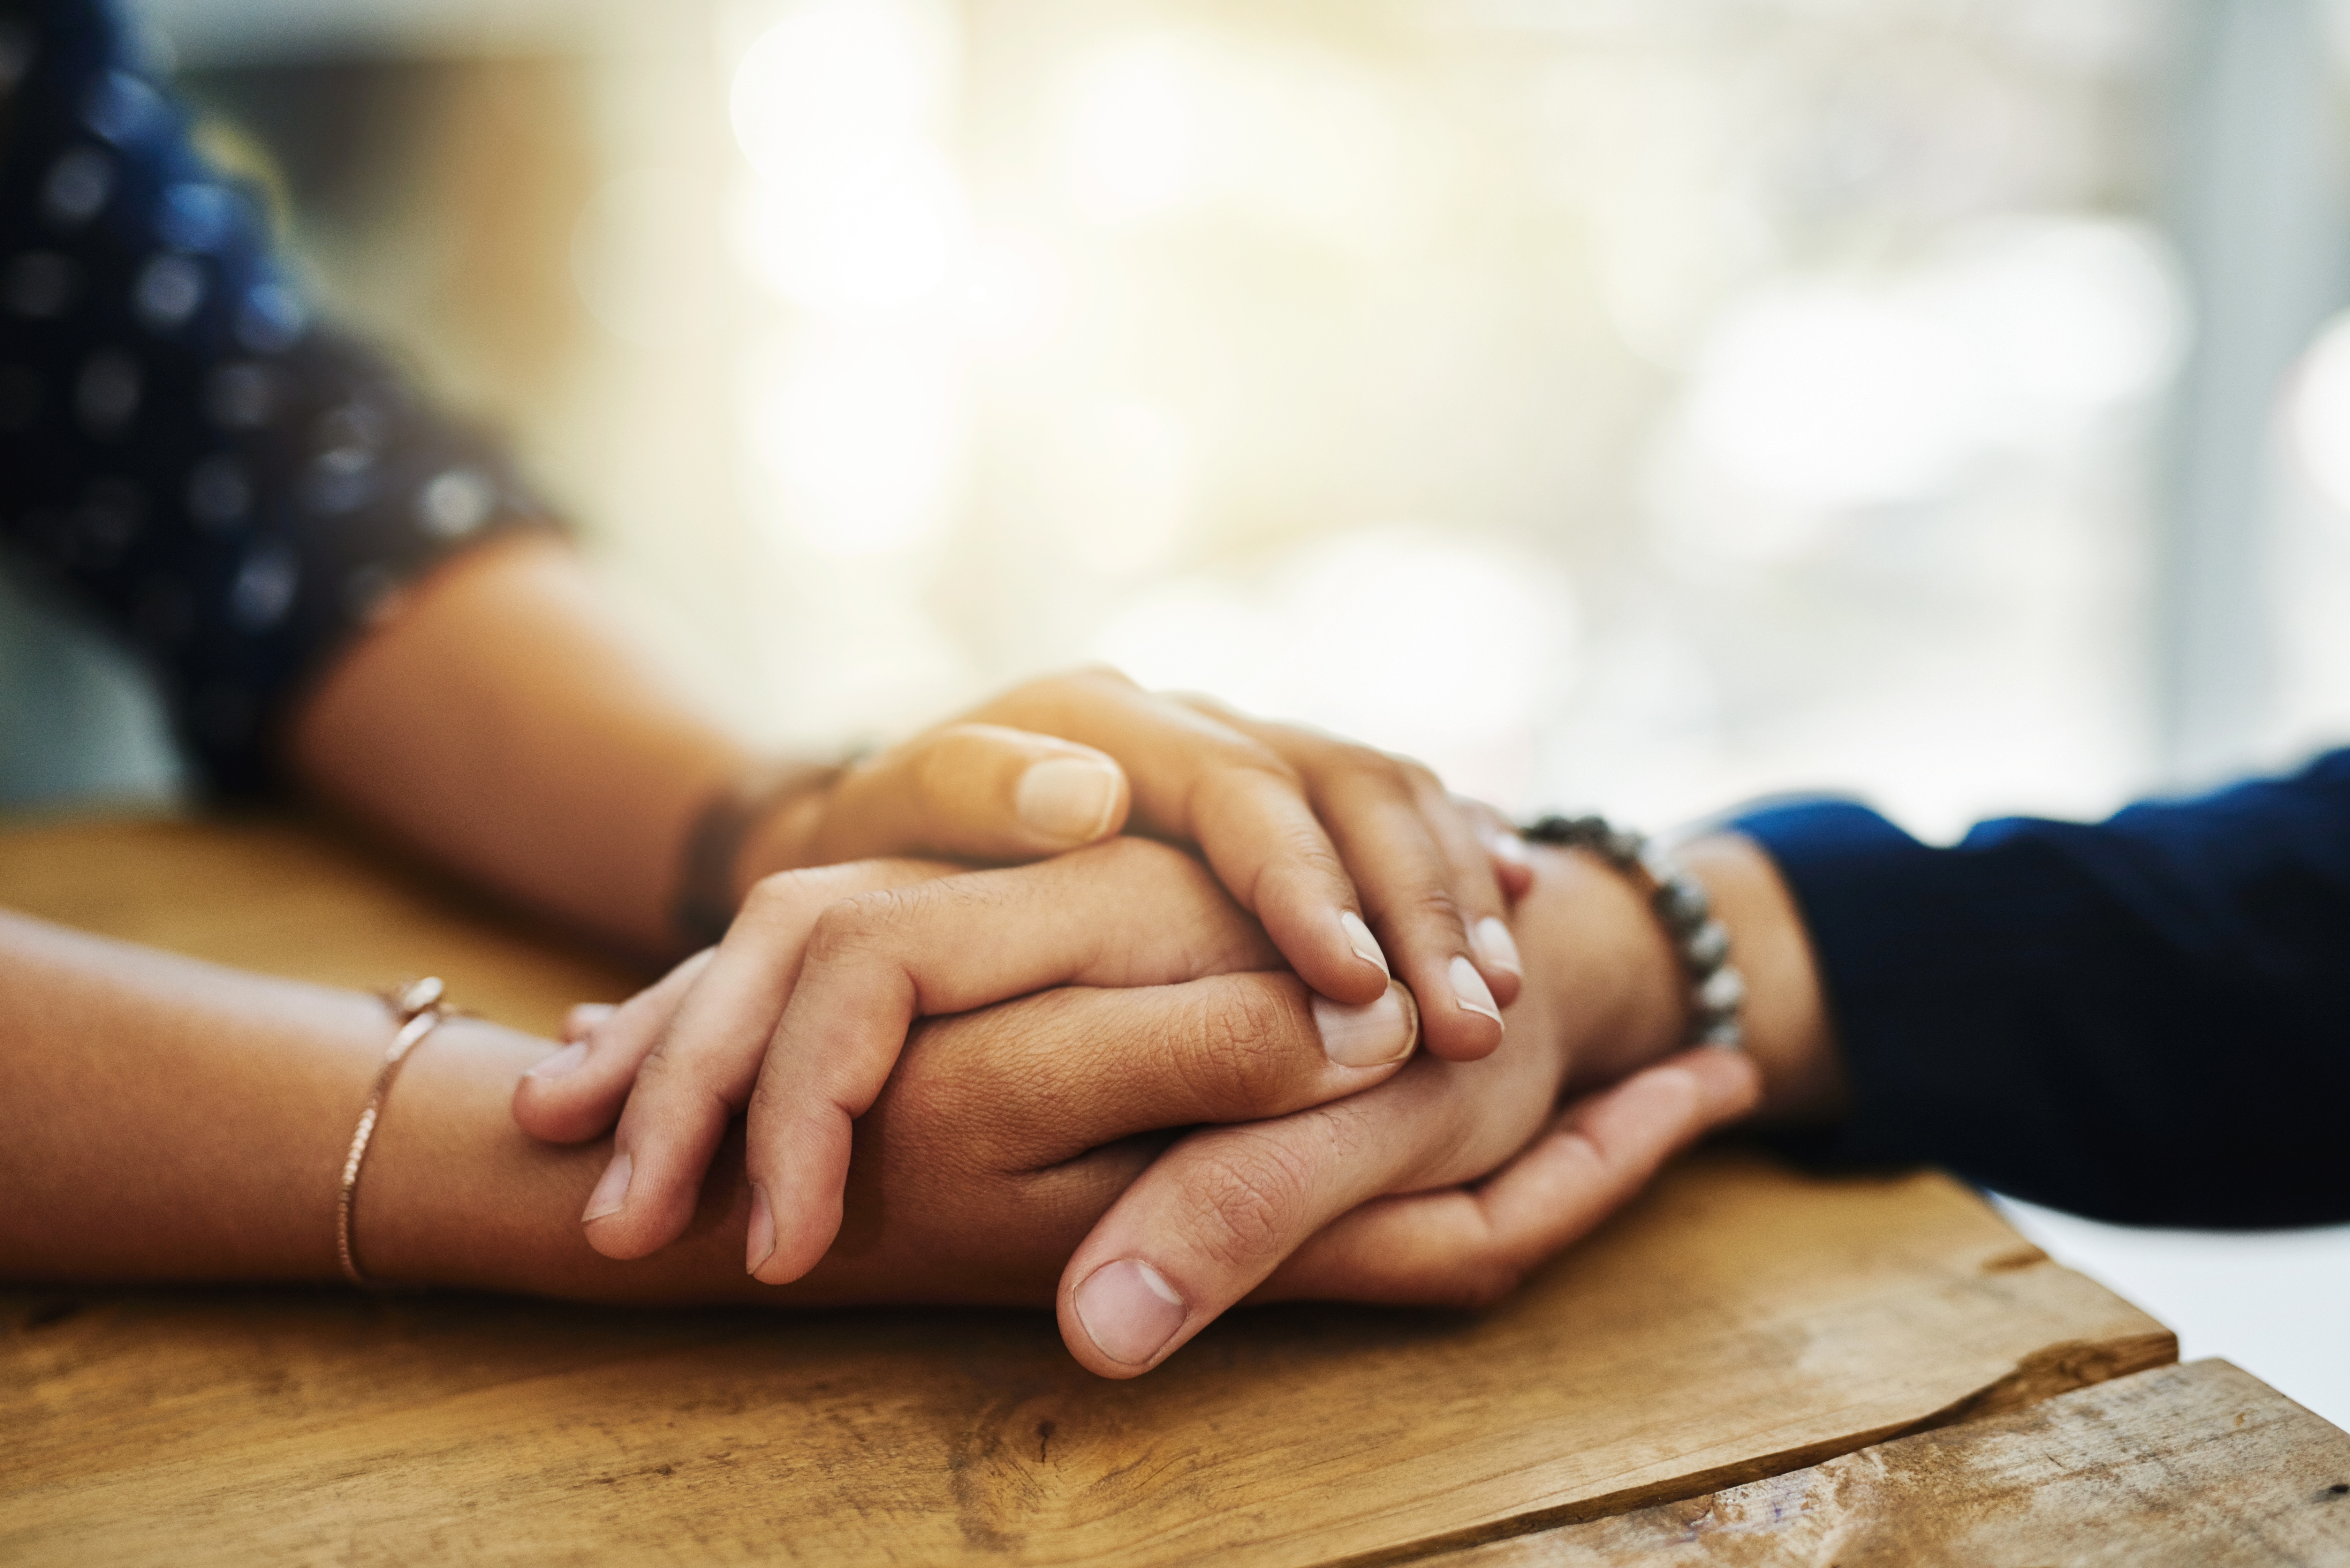 A couple holding hands in a show of support | Source: Shutterstock